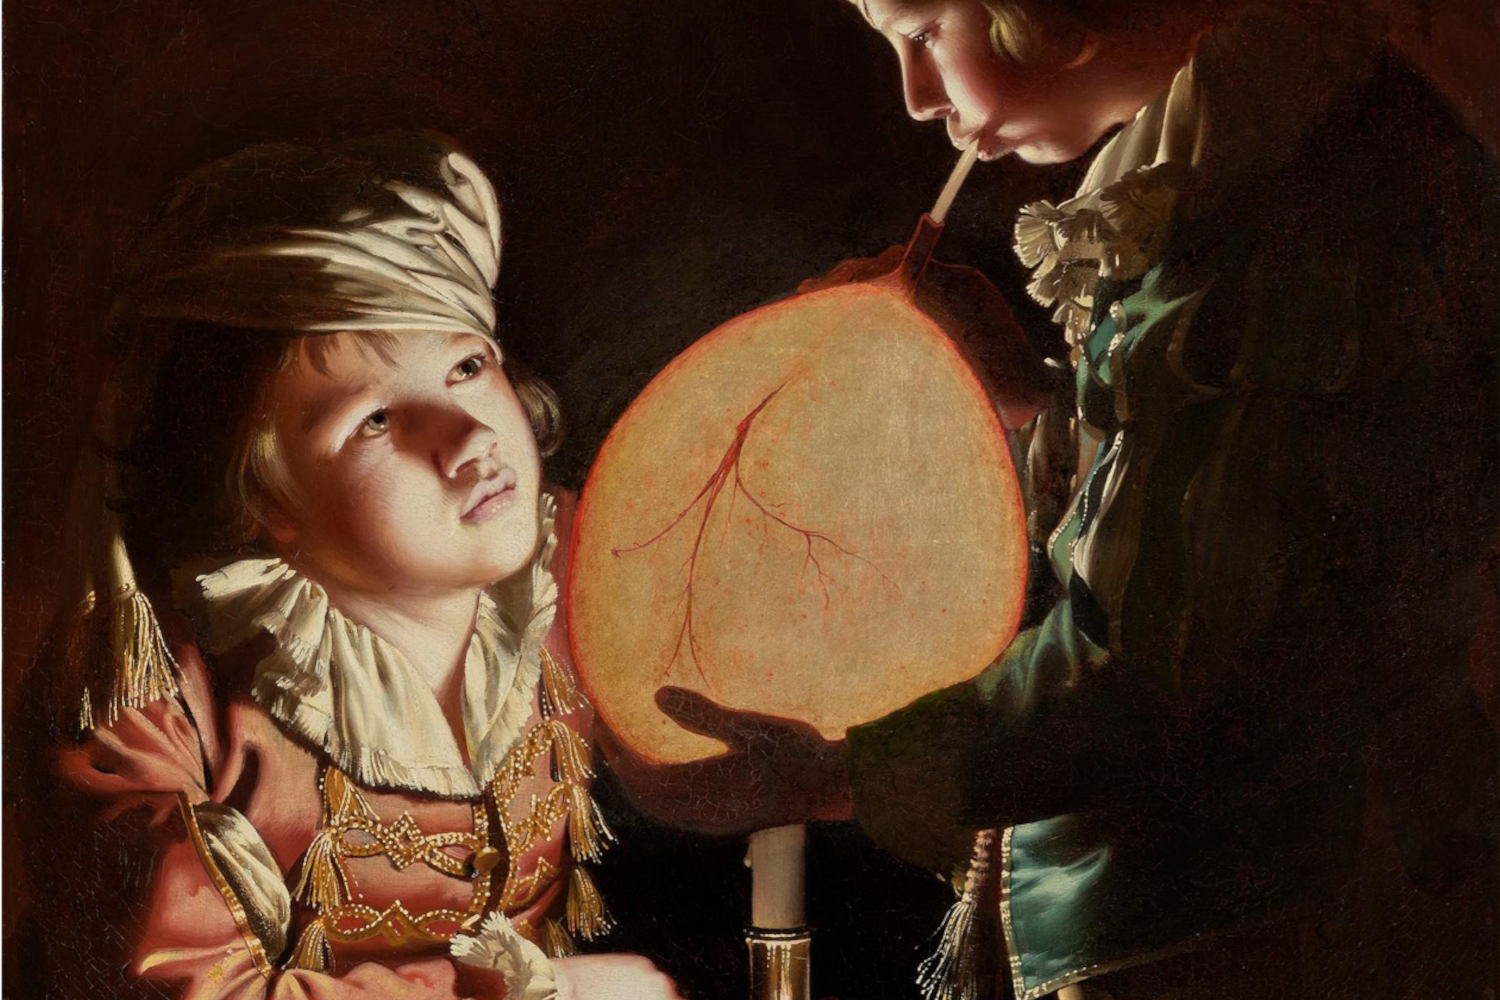 Effect of light diffusion and transmission through tissues was observed long time ago. E.g. in “Two Boys with a Bladder”, by Joseph Wright of Derby (England, 1734 - 1797) the white candle light clearly enhances tissue features, like vessels.